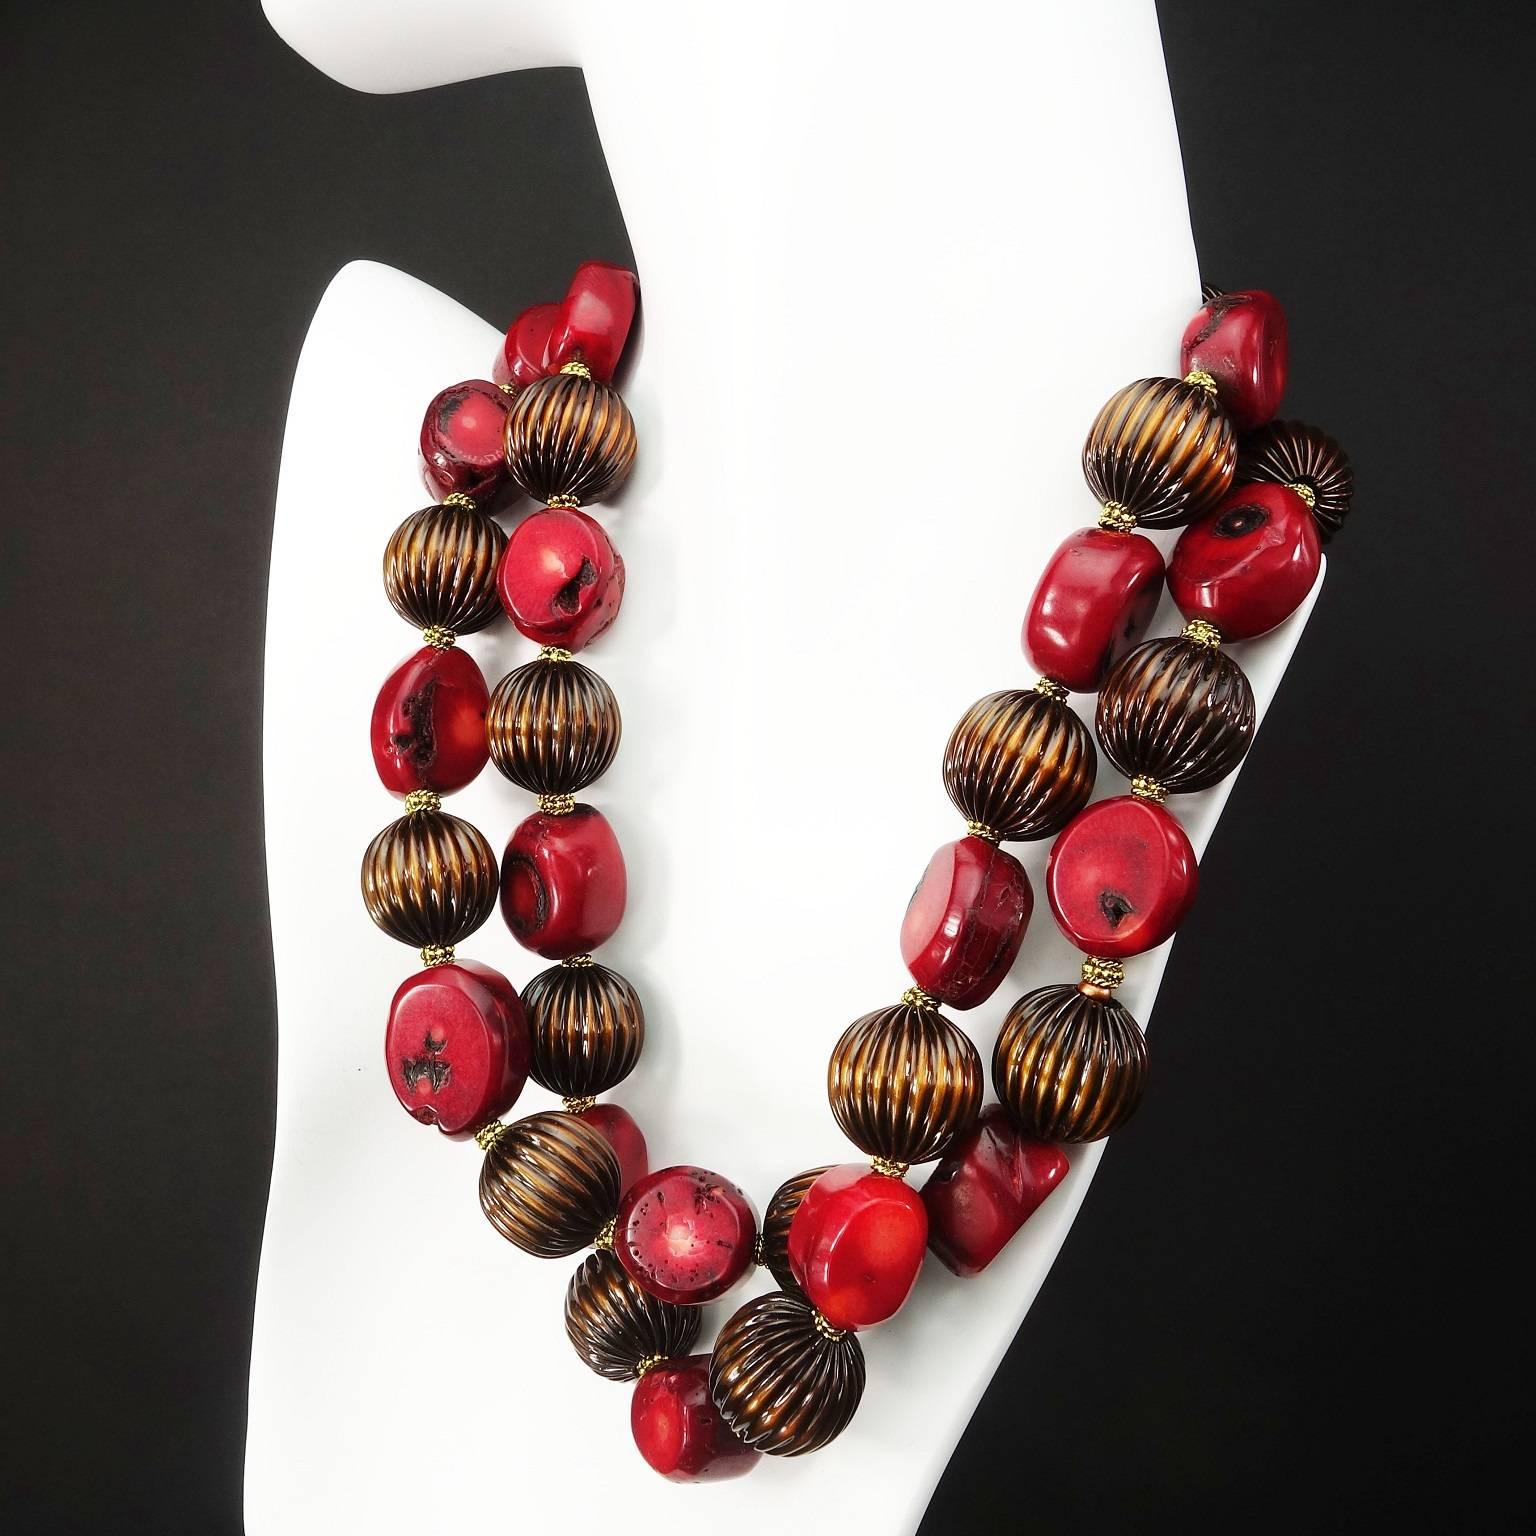 Double strand necklace of Deep Red Bamboo Coral and Etched Bronze beads with bali bead spacers. This unique Choker, 17inch, is perfect for Fall/Winter, its colors are complementary to all your cold weather wardrobe. The gold tone hook clasp is easy